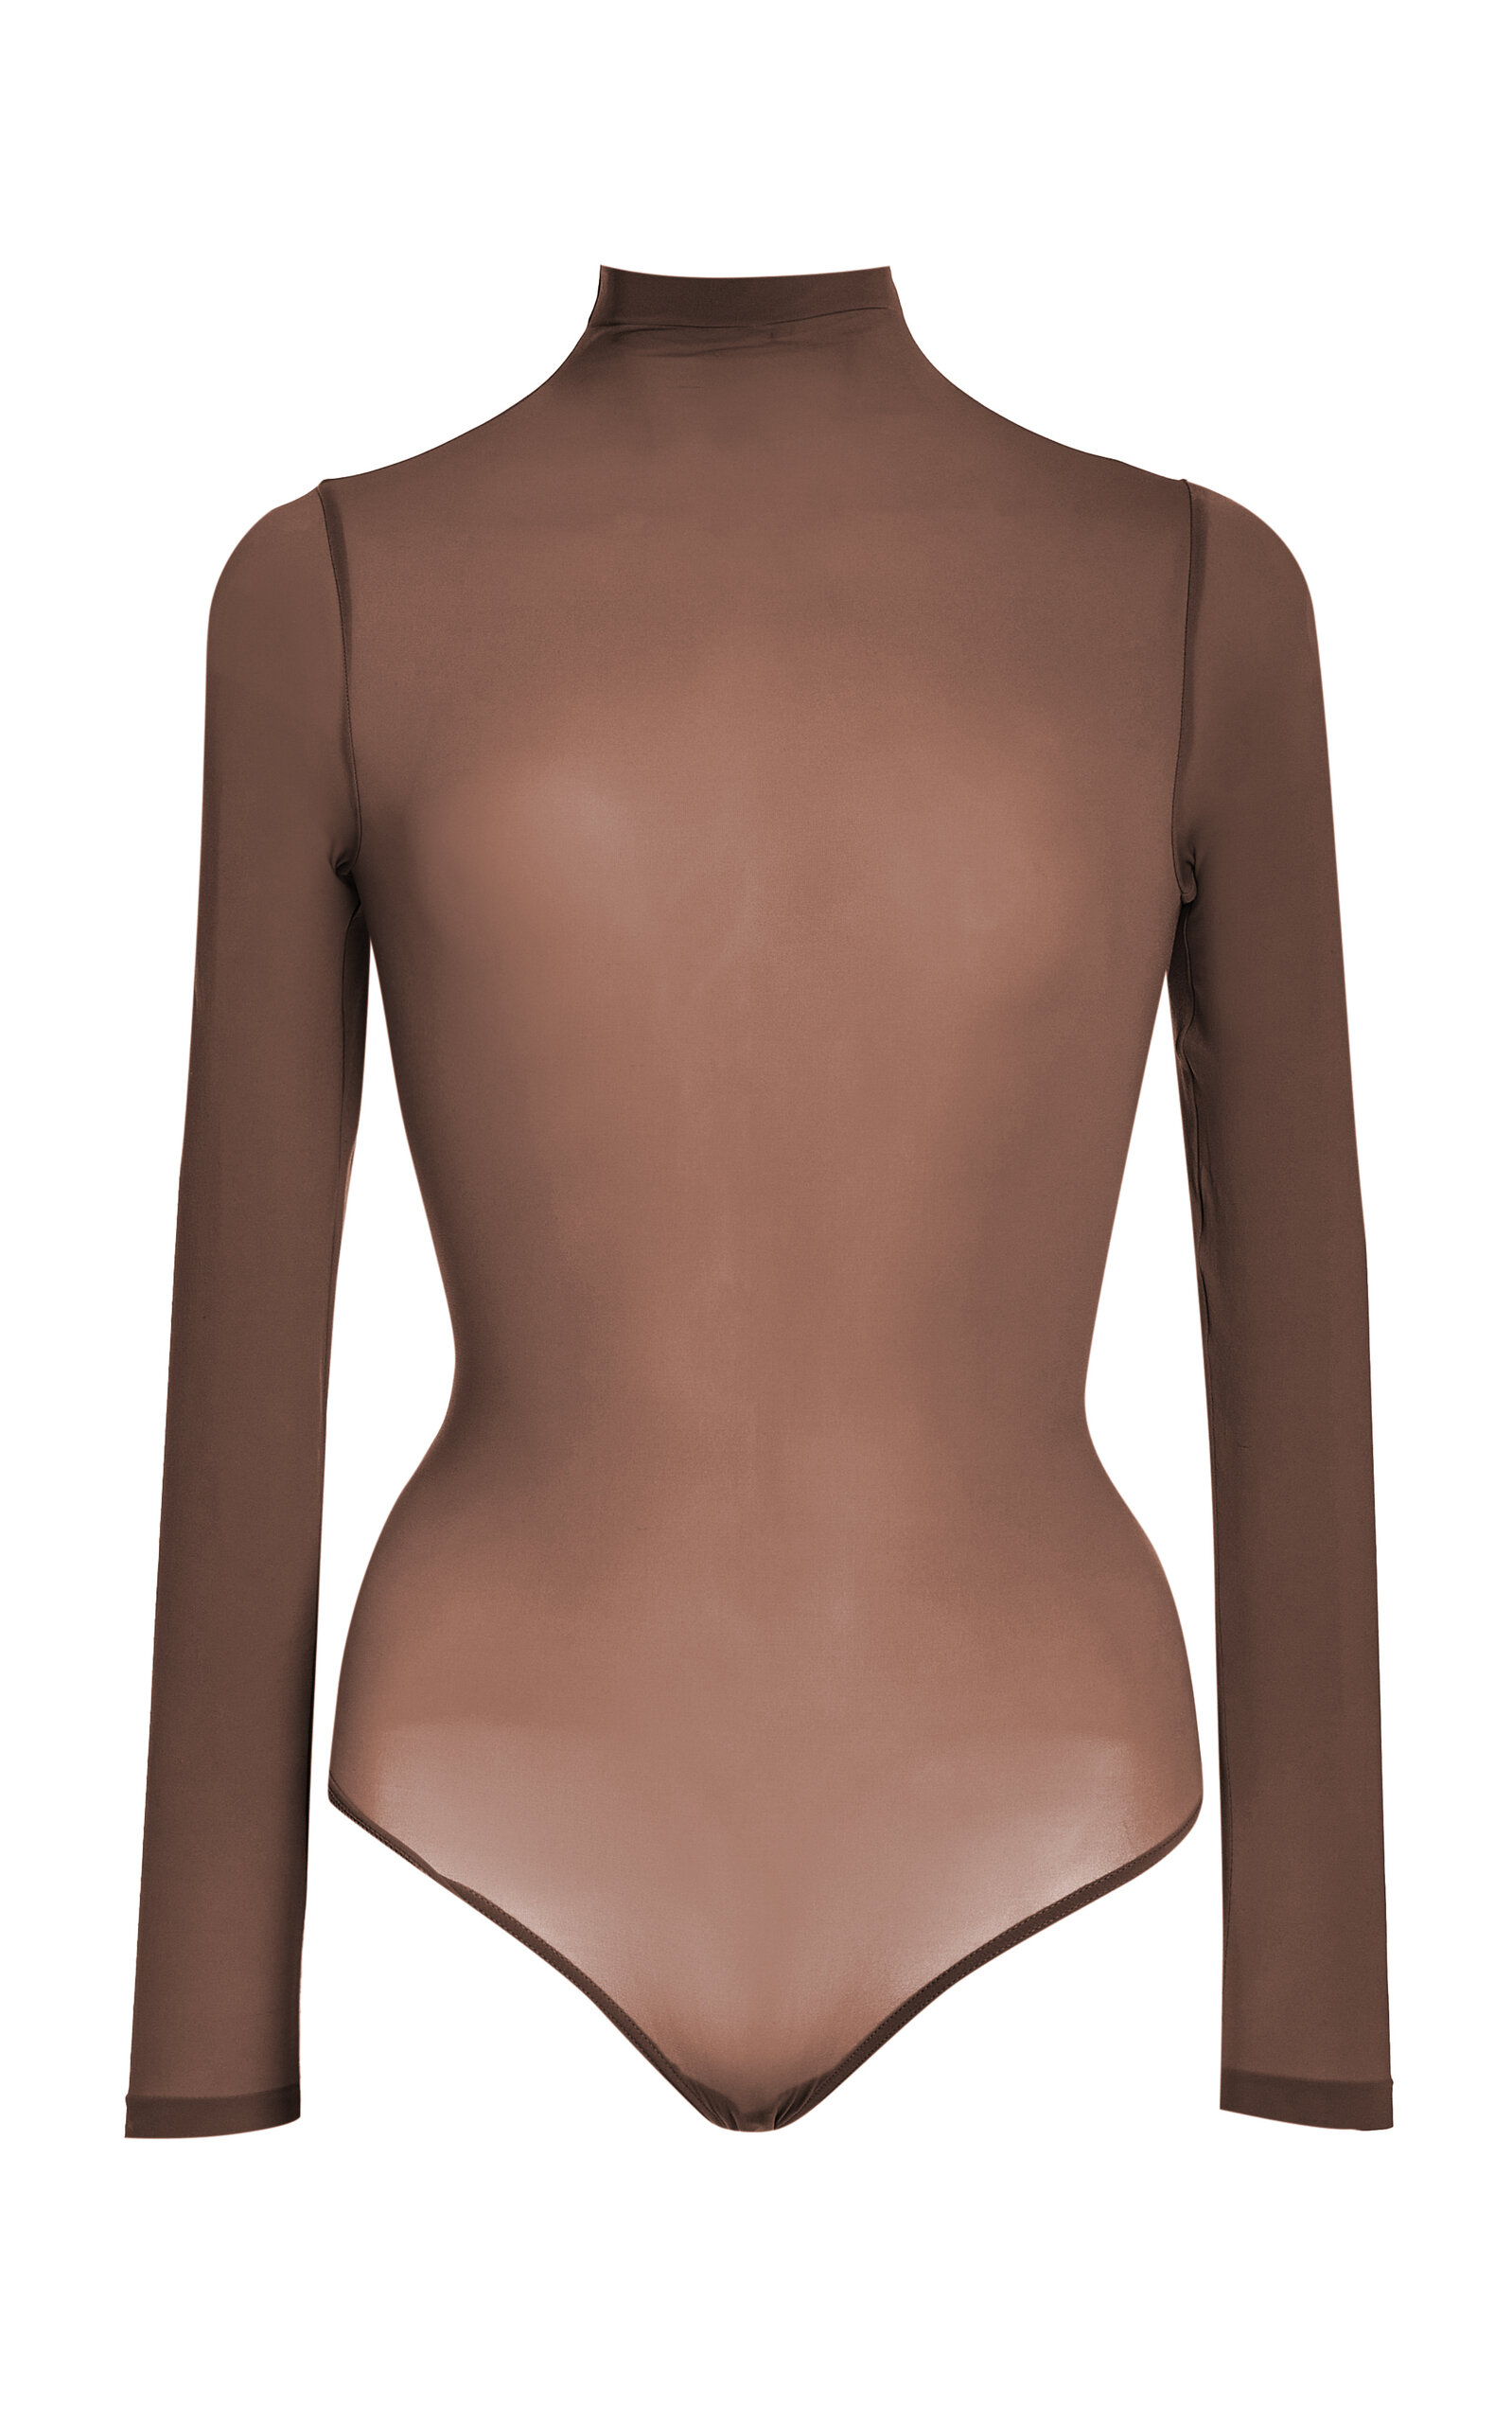 https://www.modaoperandi.com/assets/images/products/949962/588366/large_wolford-brown-buenos-aires-string-body-2.jpg?_t=1692635248